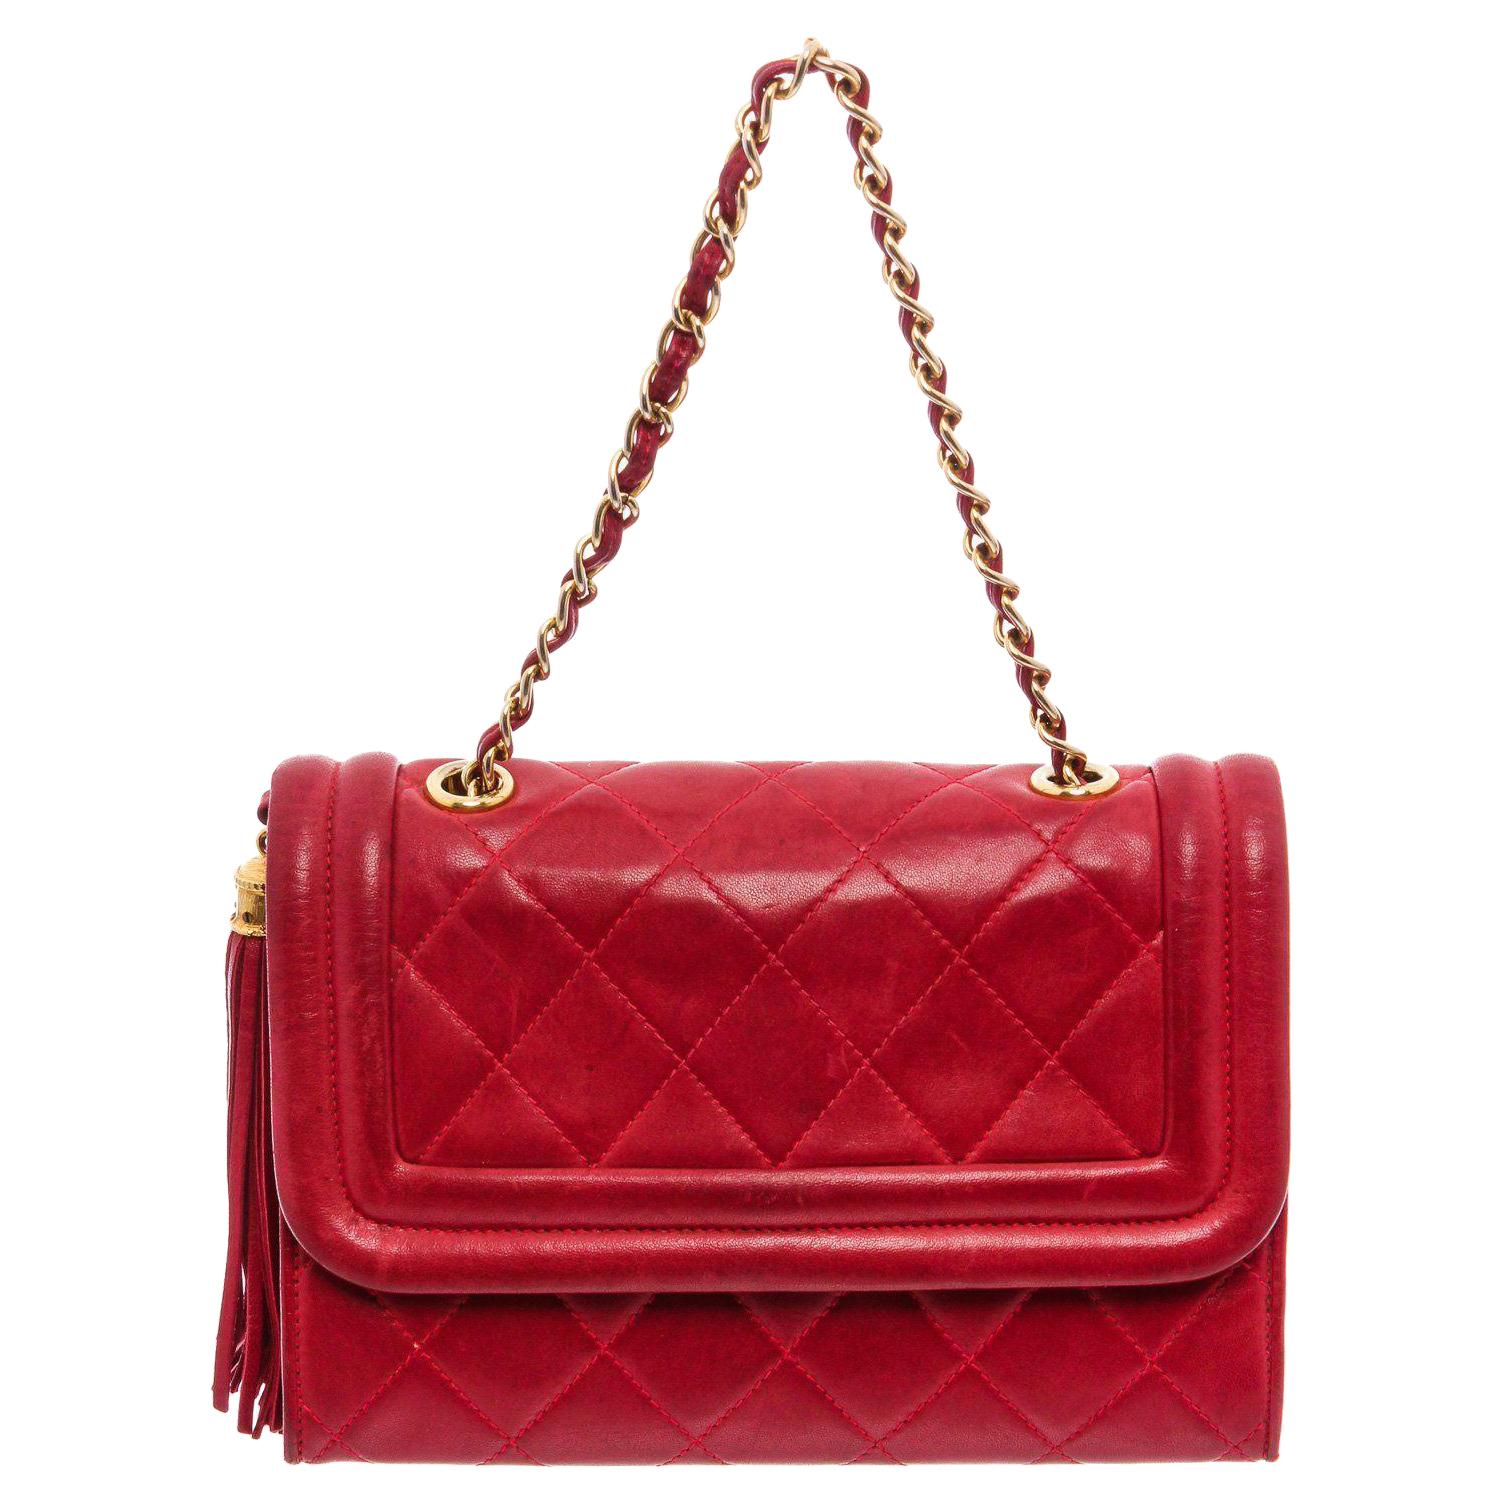 Chanel Vintage Red Quilted Leather Camera Bag